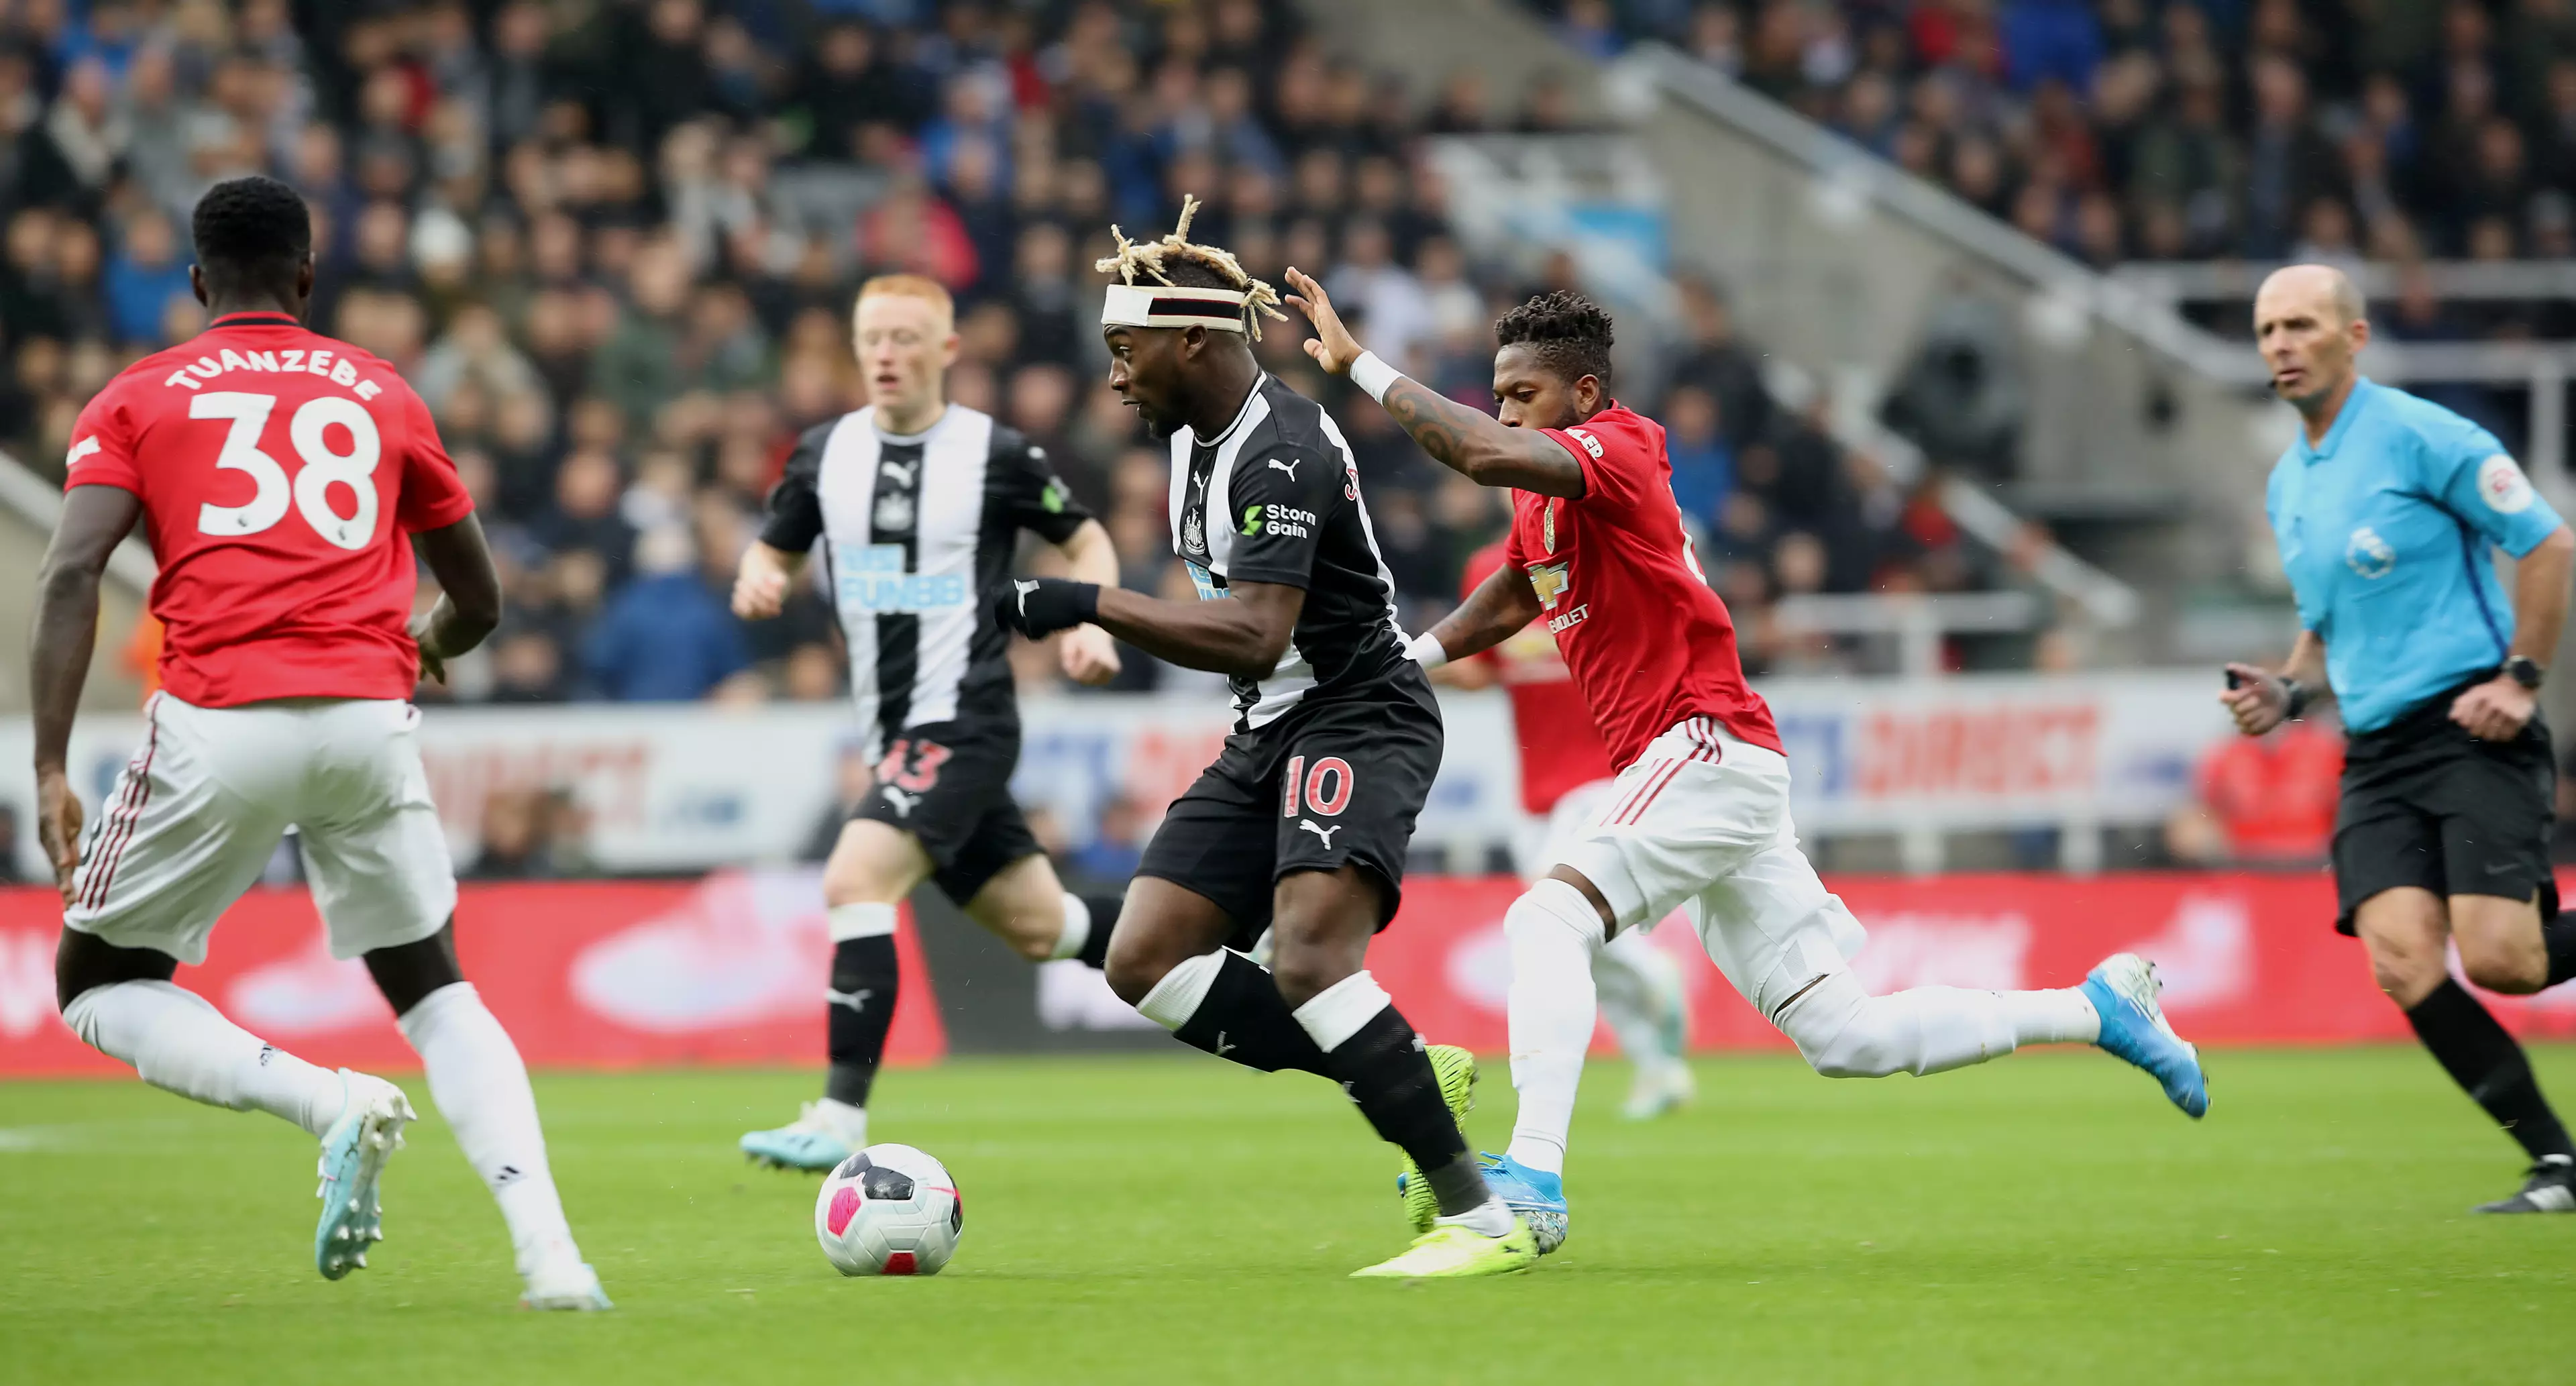 Fred chasing Allan Saint-Maximin became a frequent occurrence on Sunday. Image: PA Images